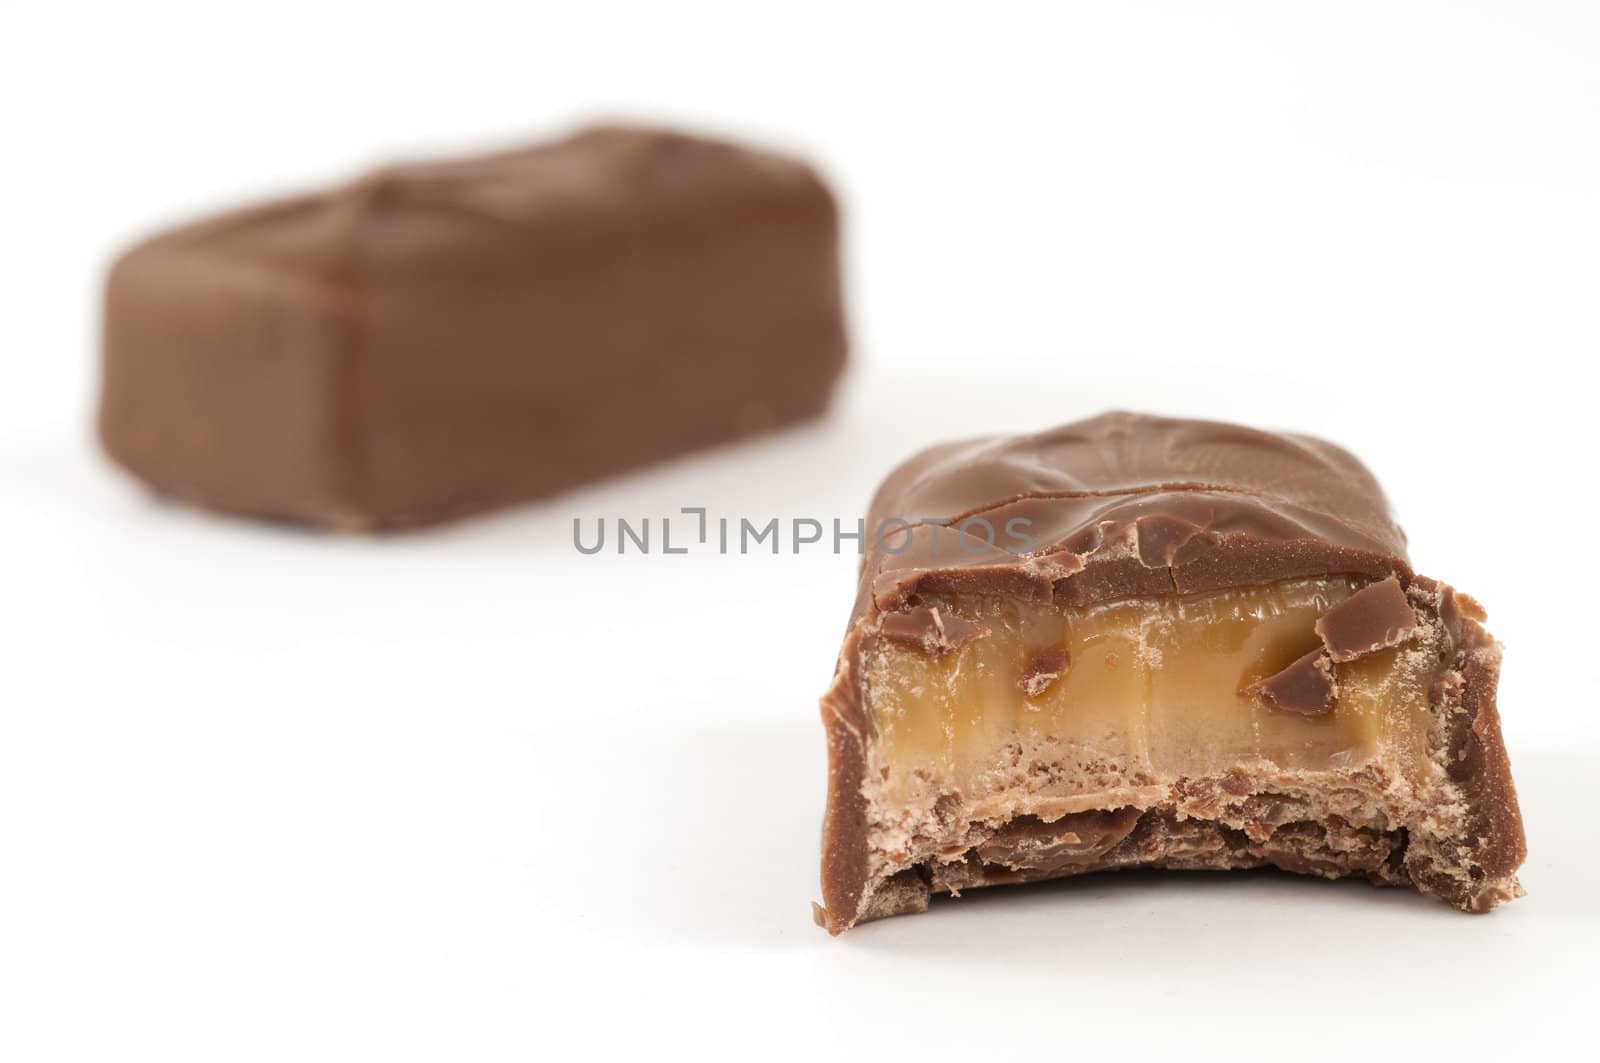 Selective focus on the bite out of a small chocolate bar with another chocolate bar in the background with both isolated on white background